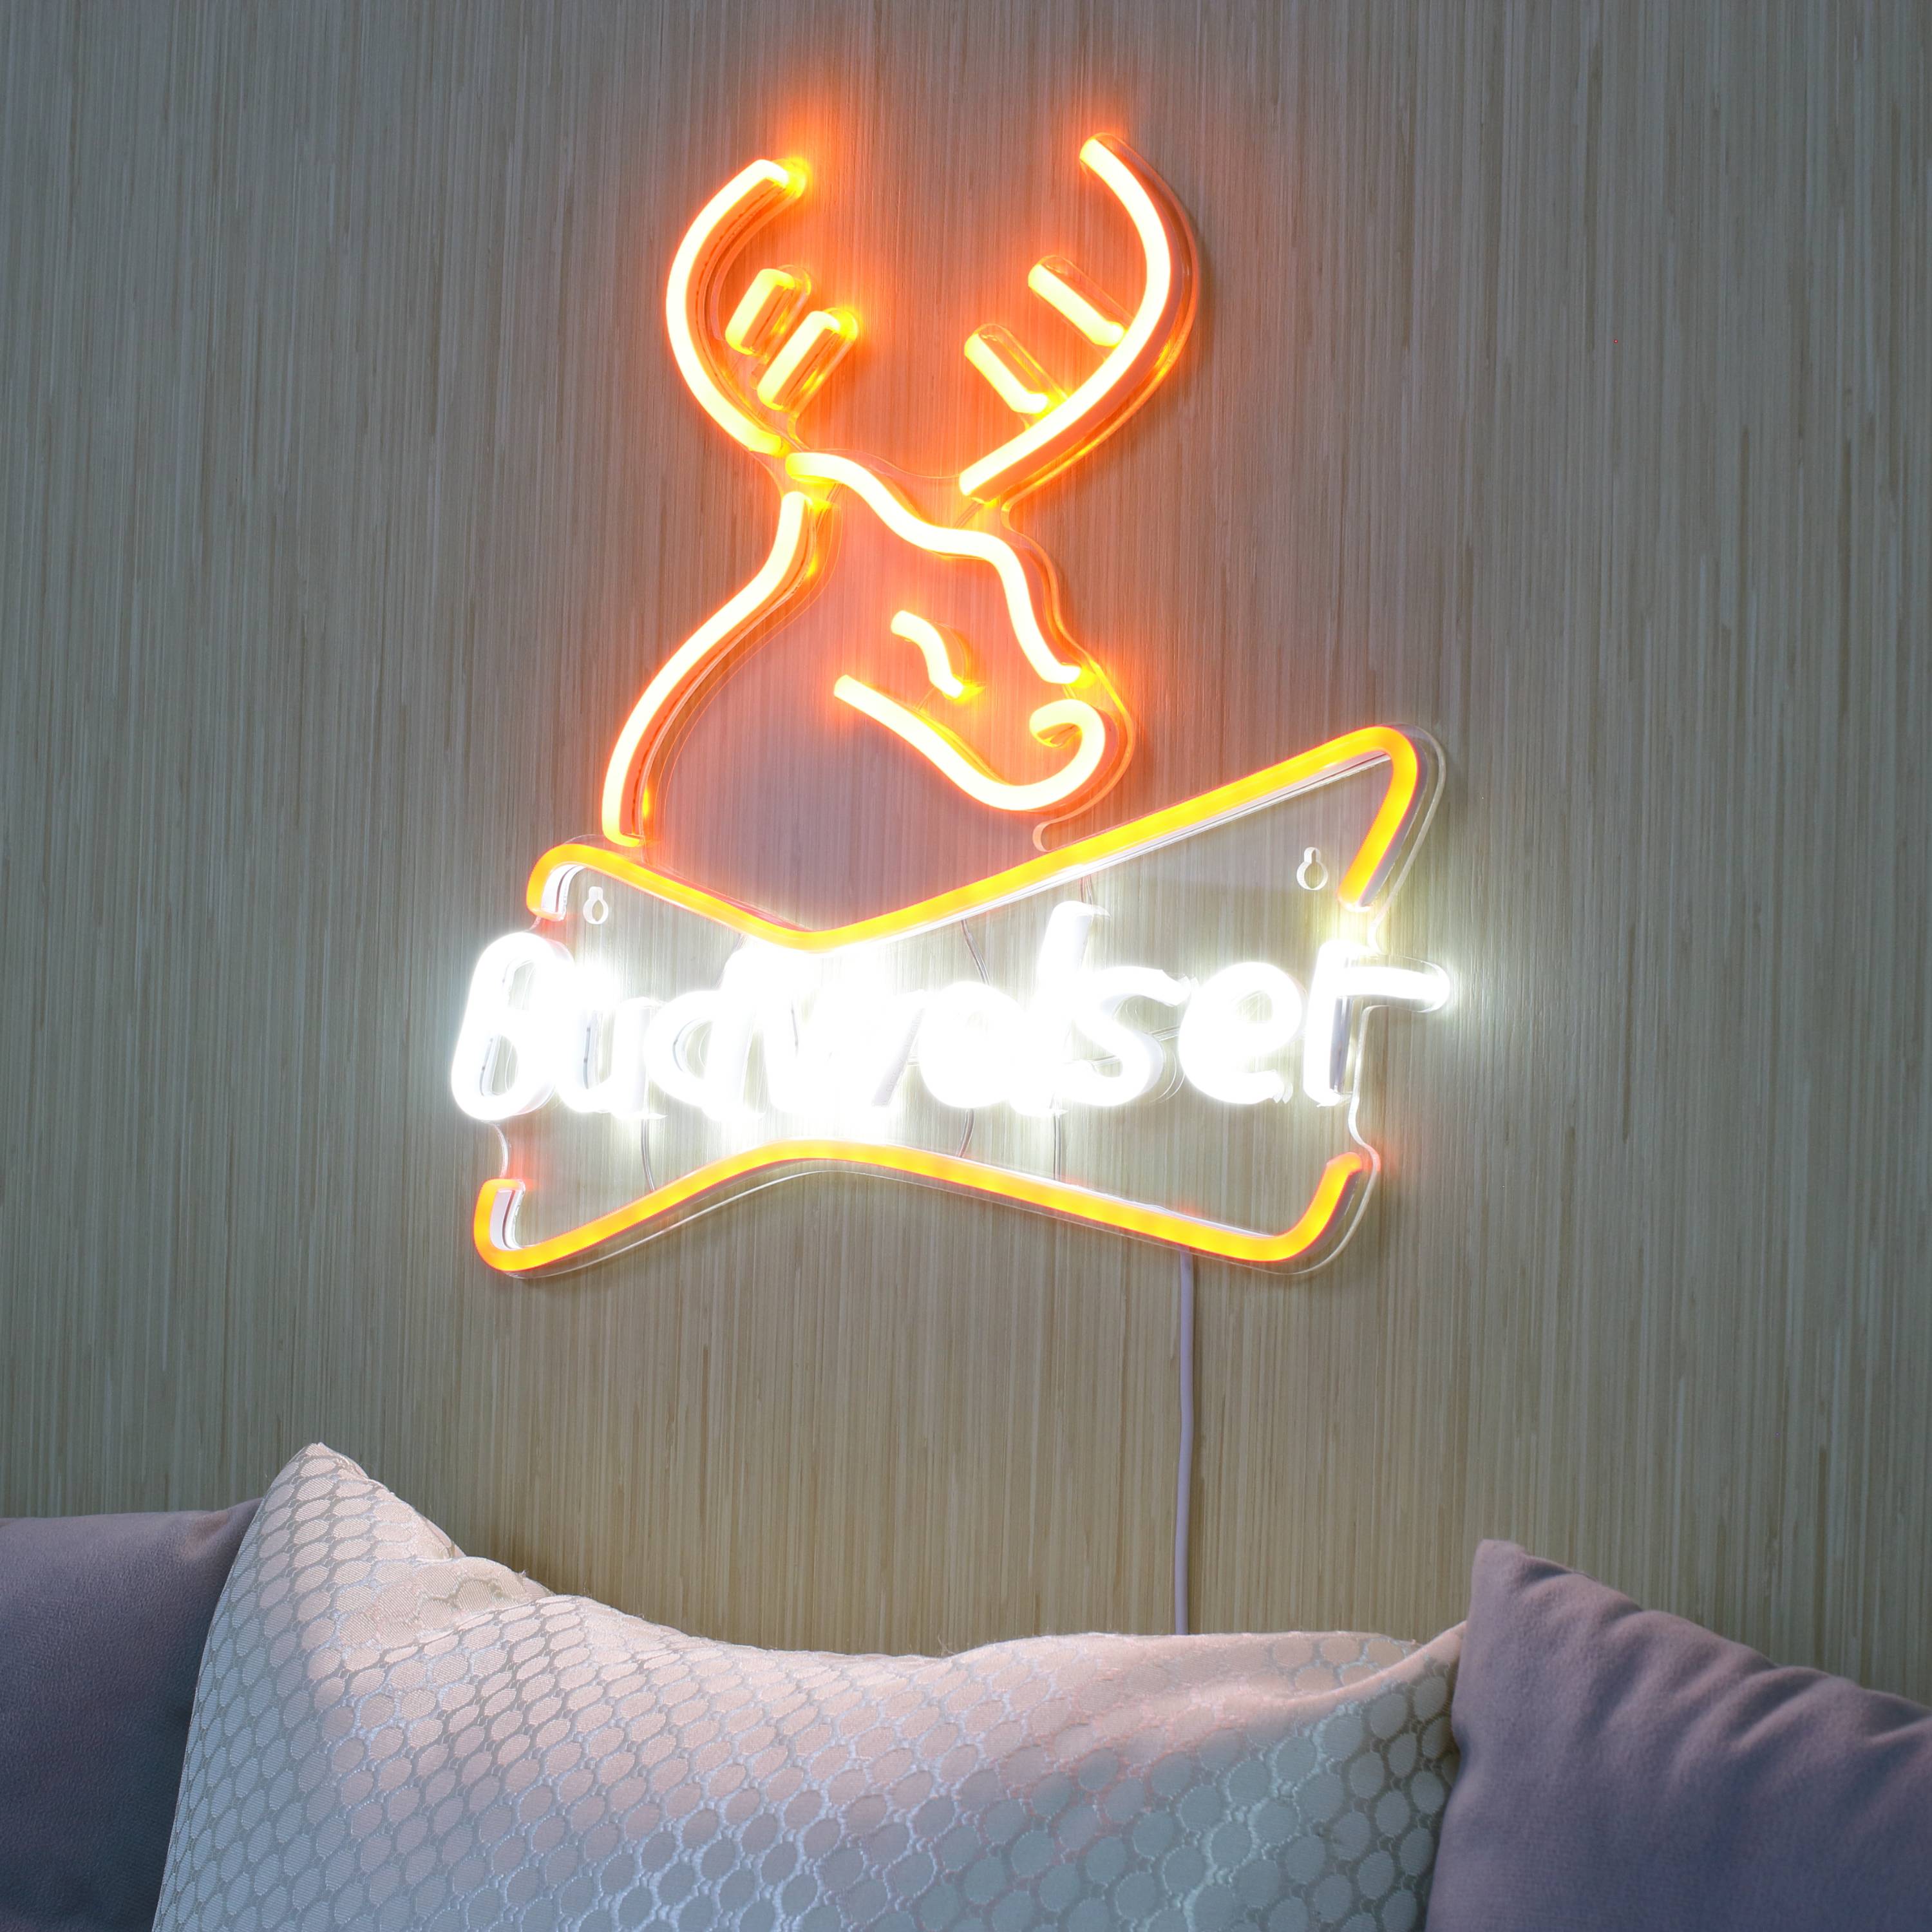 Budweiser with Deer Head Large Flex Neon LED Sign